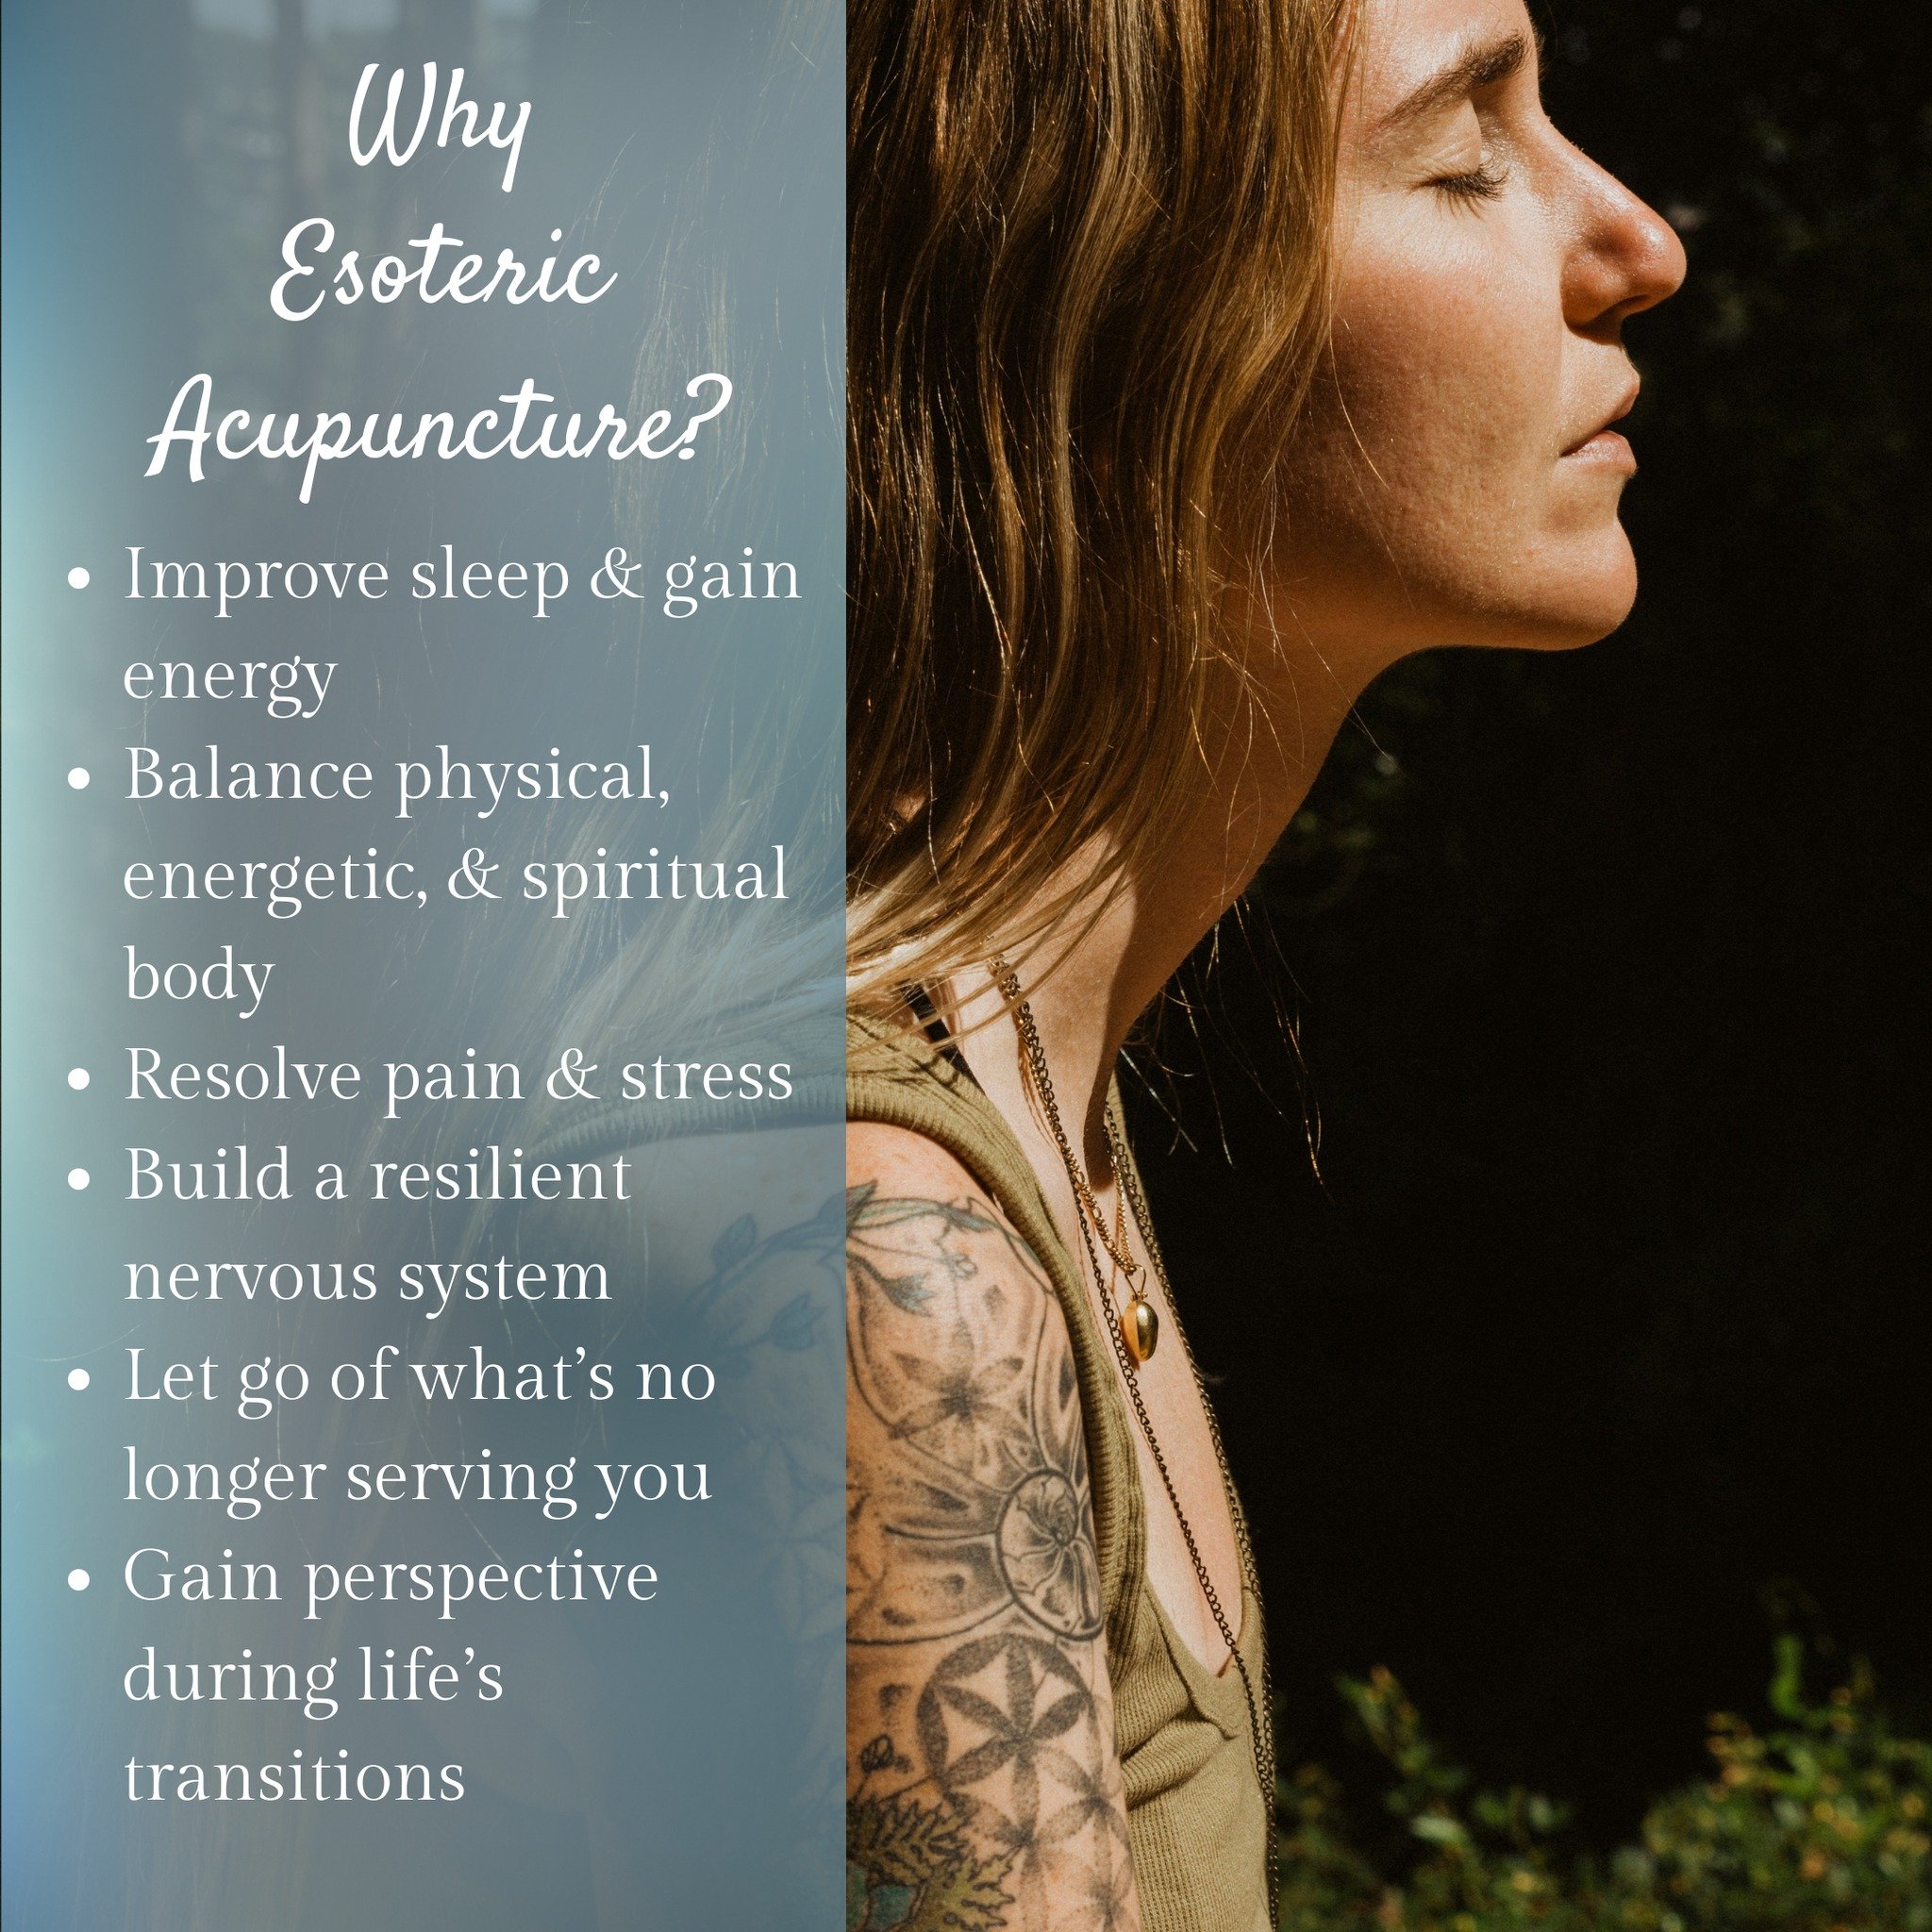 🌟 We'd love to sit down and chat about Esoteric Acupuncture and its benefits. 🌟

🔮 Esoteric Acupuncture works with Sacred Geometry, the Chakras System, and the Quabbalistic Tree of Life to balance the physical, mental, and spiritual bodies. It hel